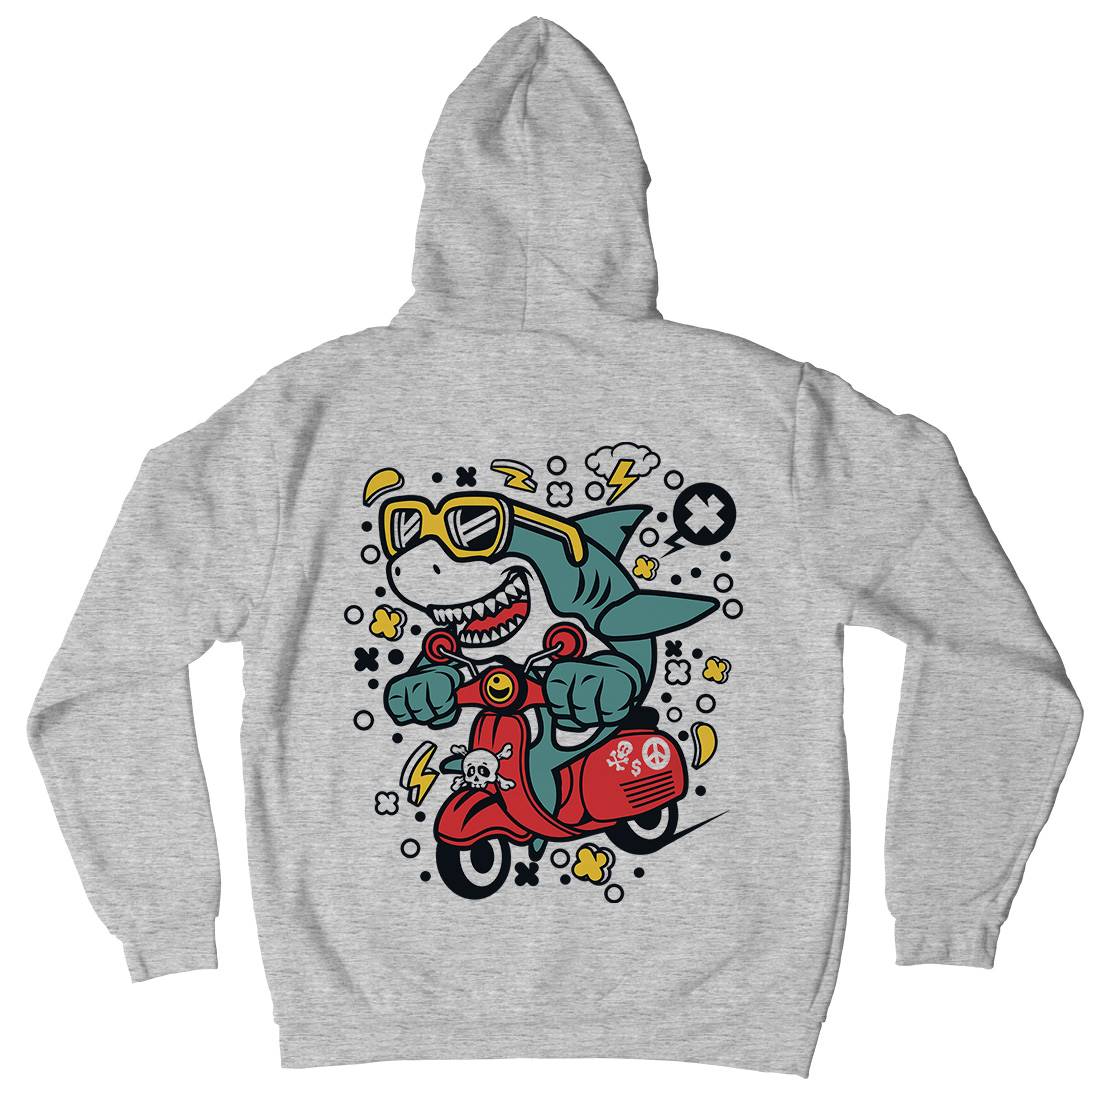 Shark Scooter Mens Hoodie With Pocket Motorcycles C648